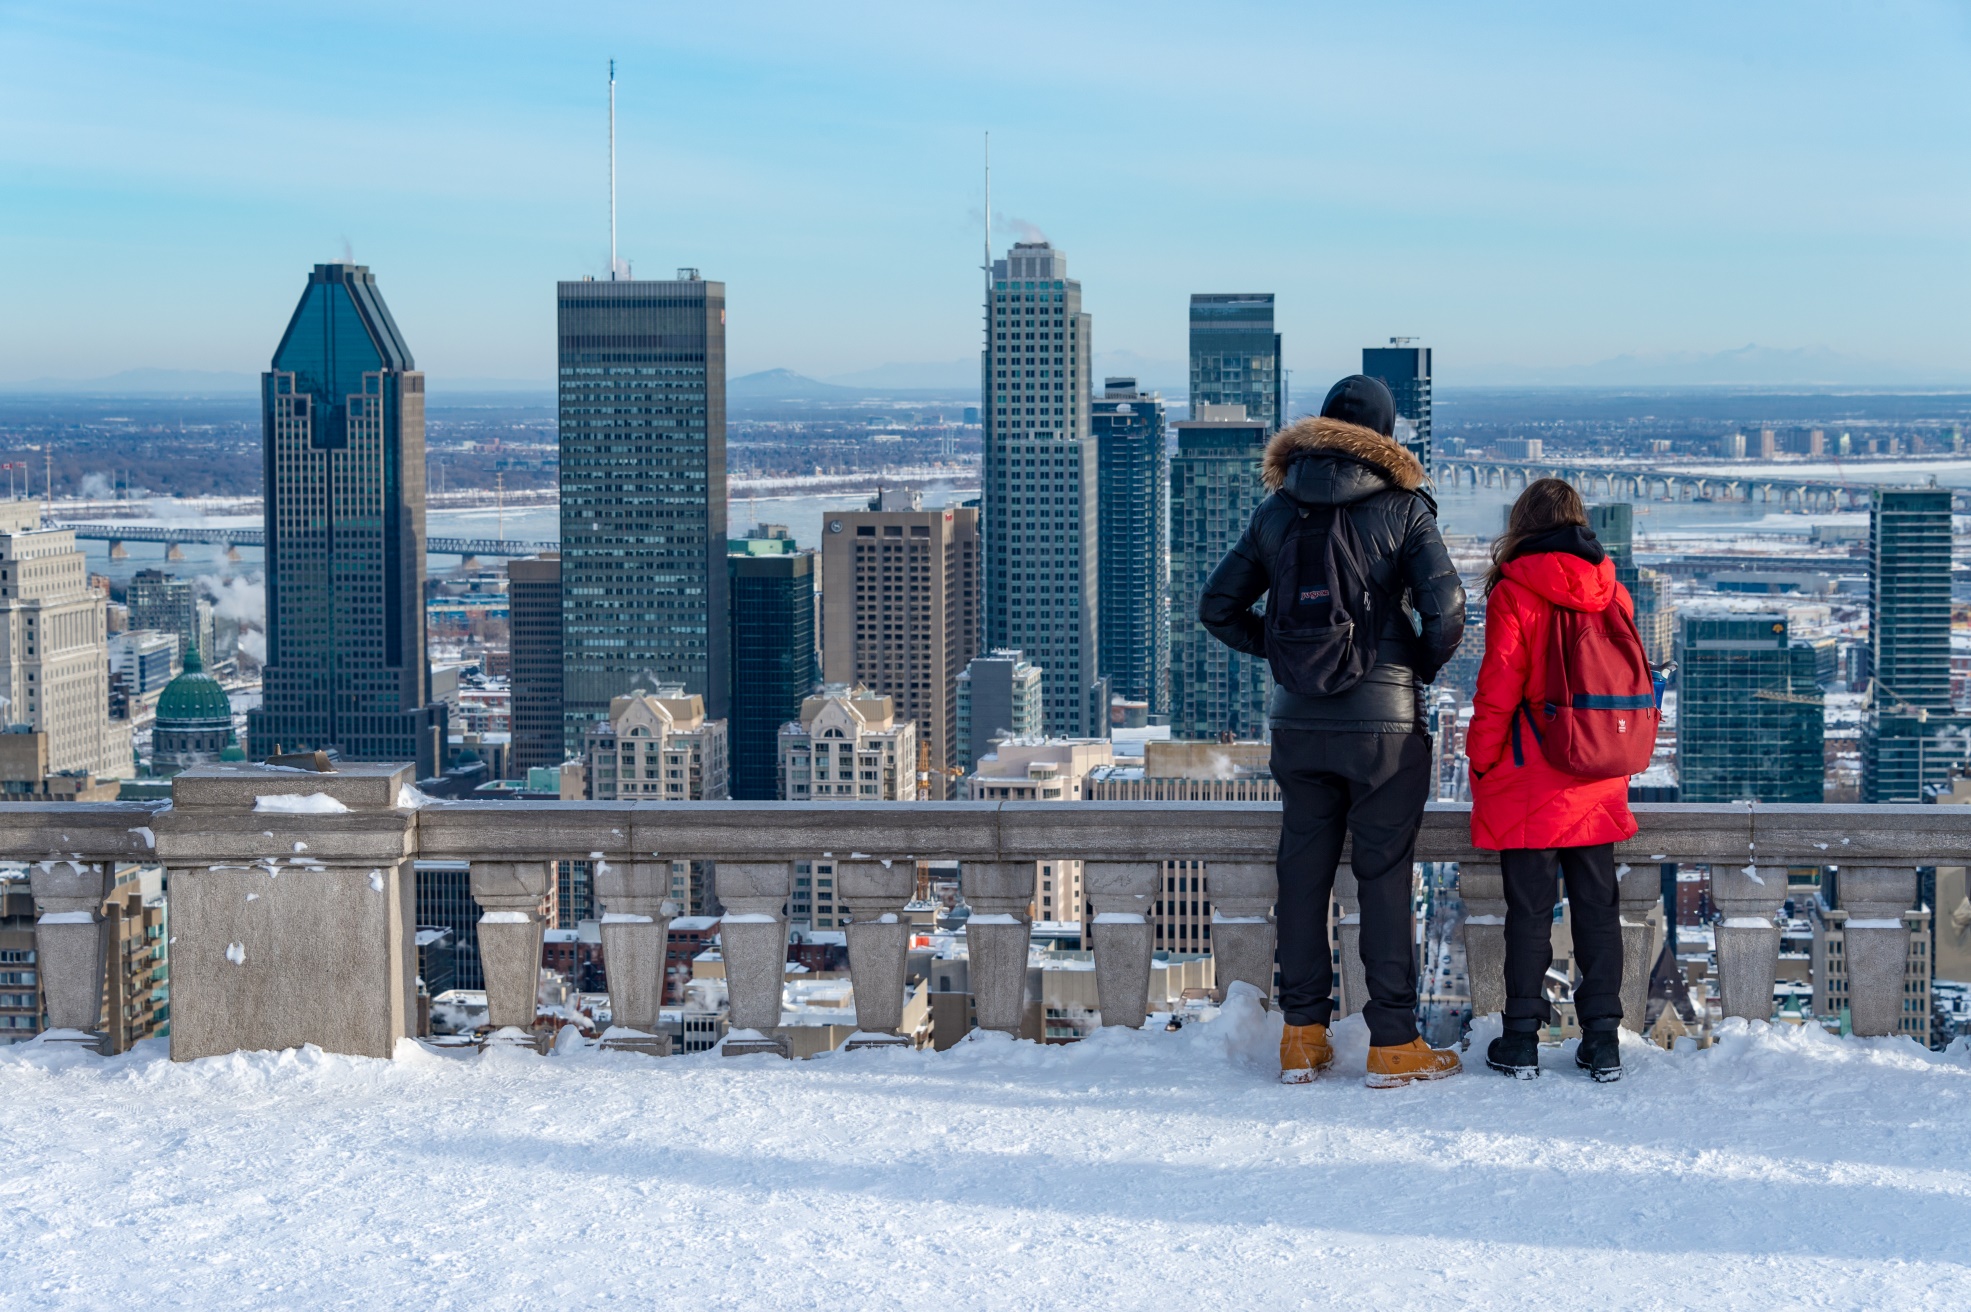 Two people look out over a snowy Montreal skyline